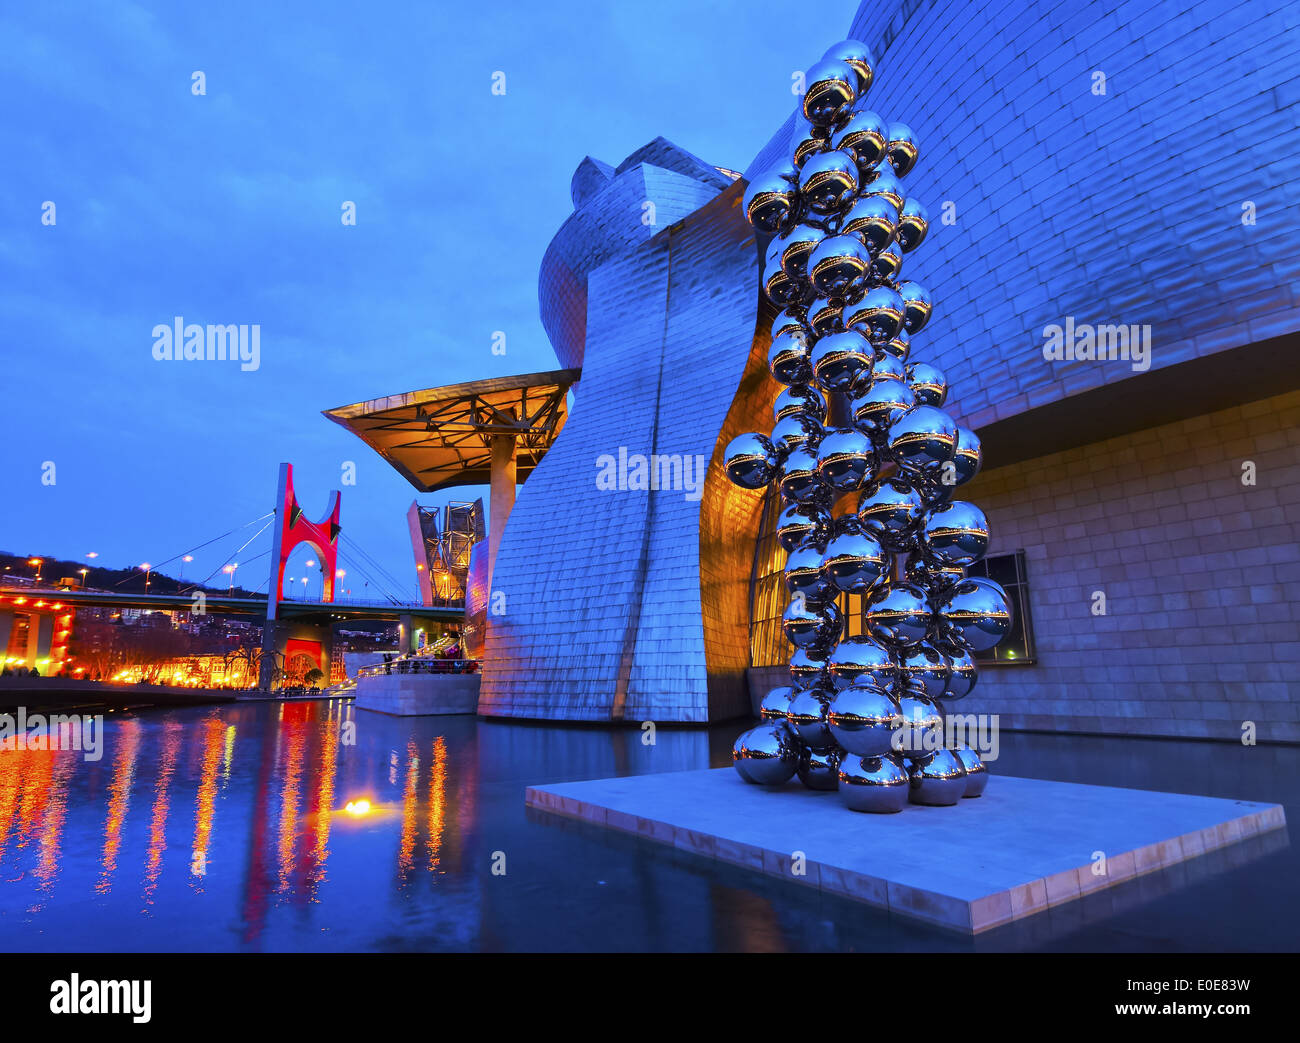 Sculpture 'The Big Tree' by Anish Kapoor in front of The Guggenheim Museum in Bilbao, Basque Country, Spain Stock Photo